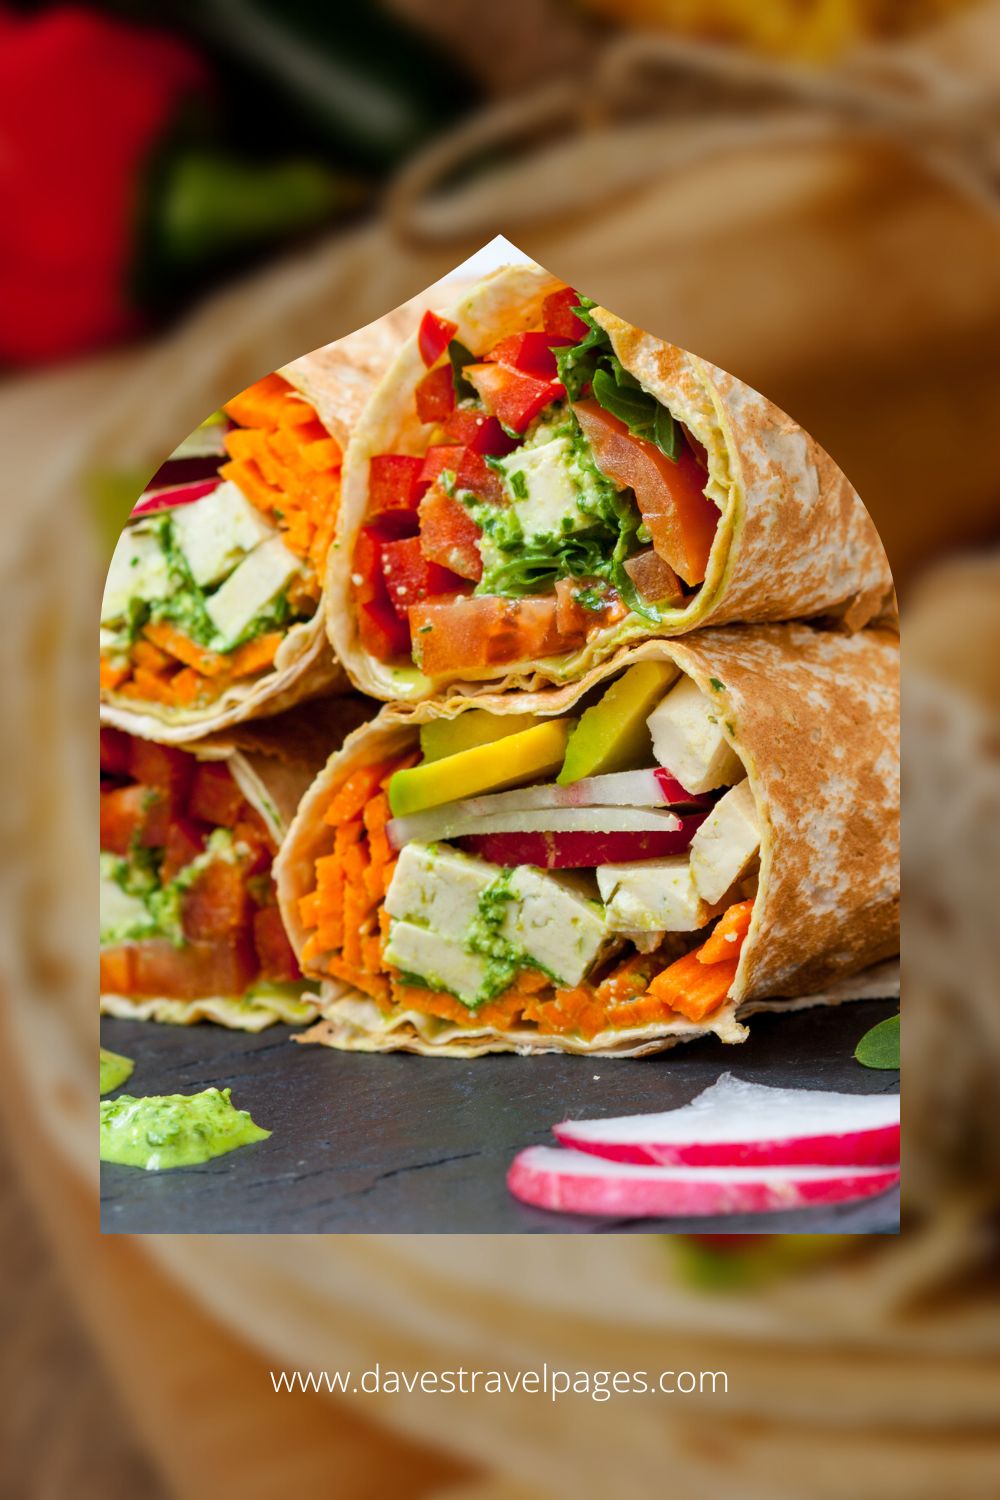 Tortilla wraps are a quick road trip meal